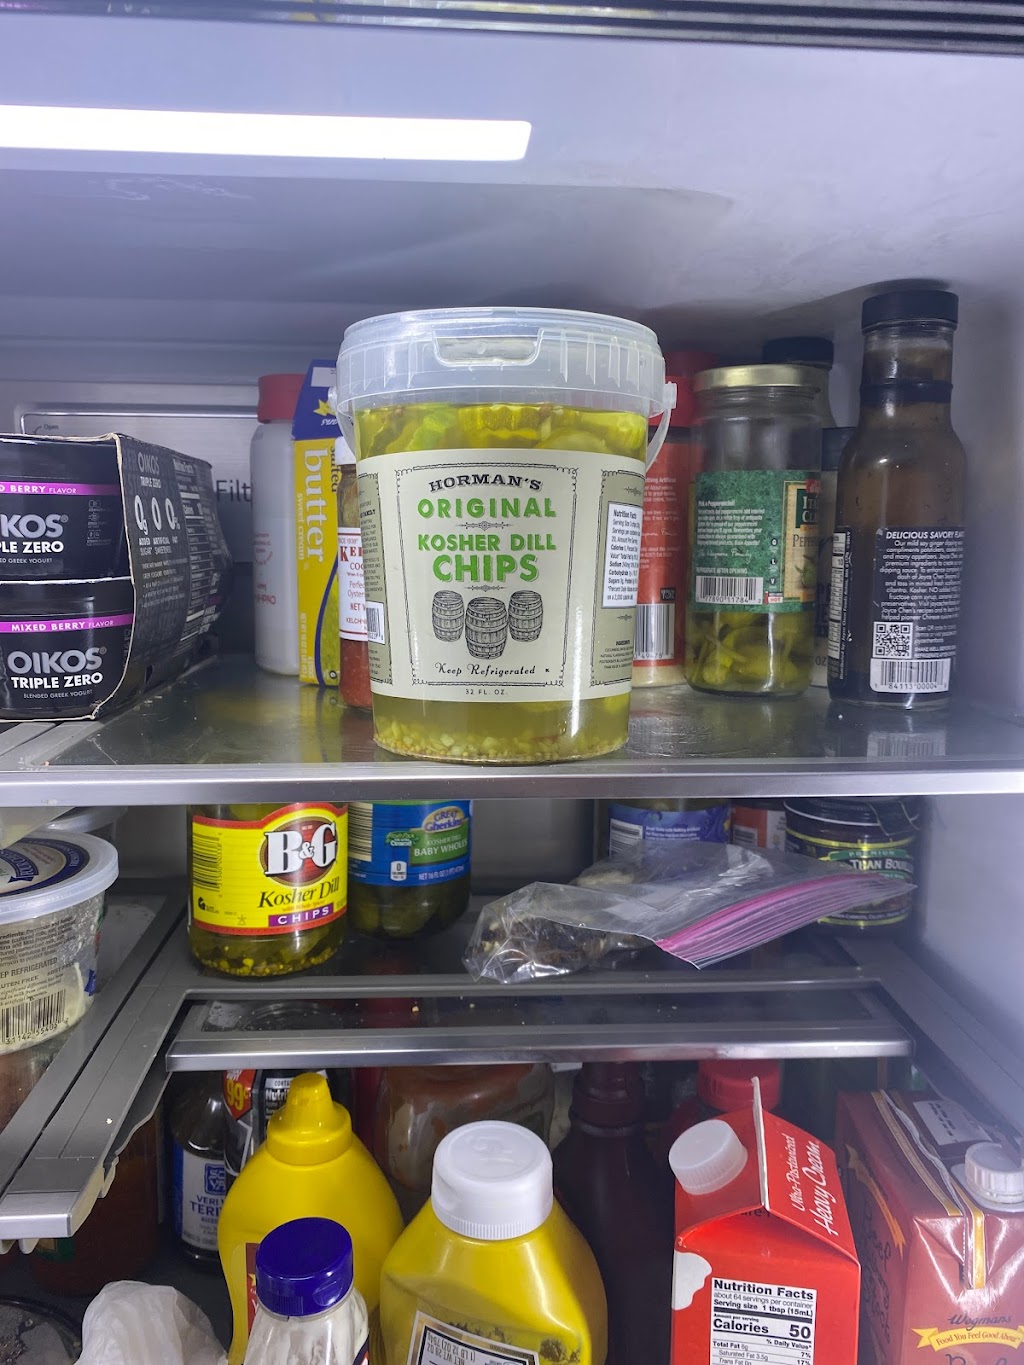 Hormans Family Pickles | 32 Garvies Point Rd, Glen Cove, NY 11542 | Phone: (516) 676-0640